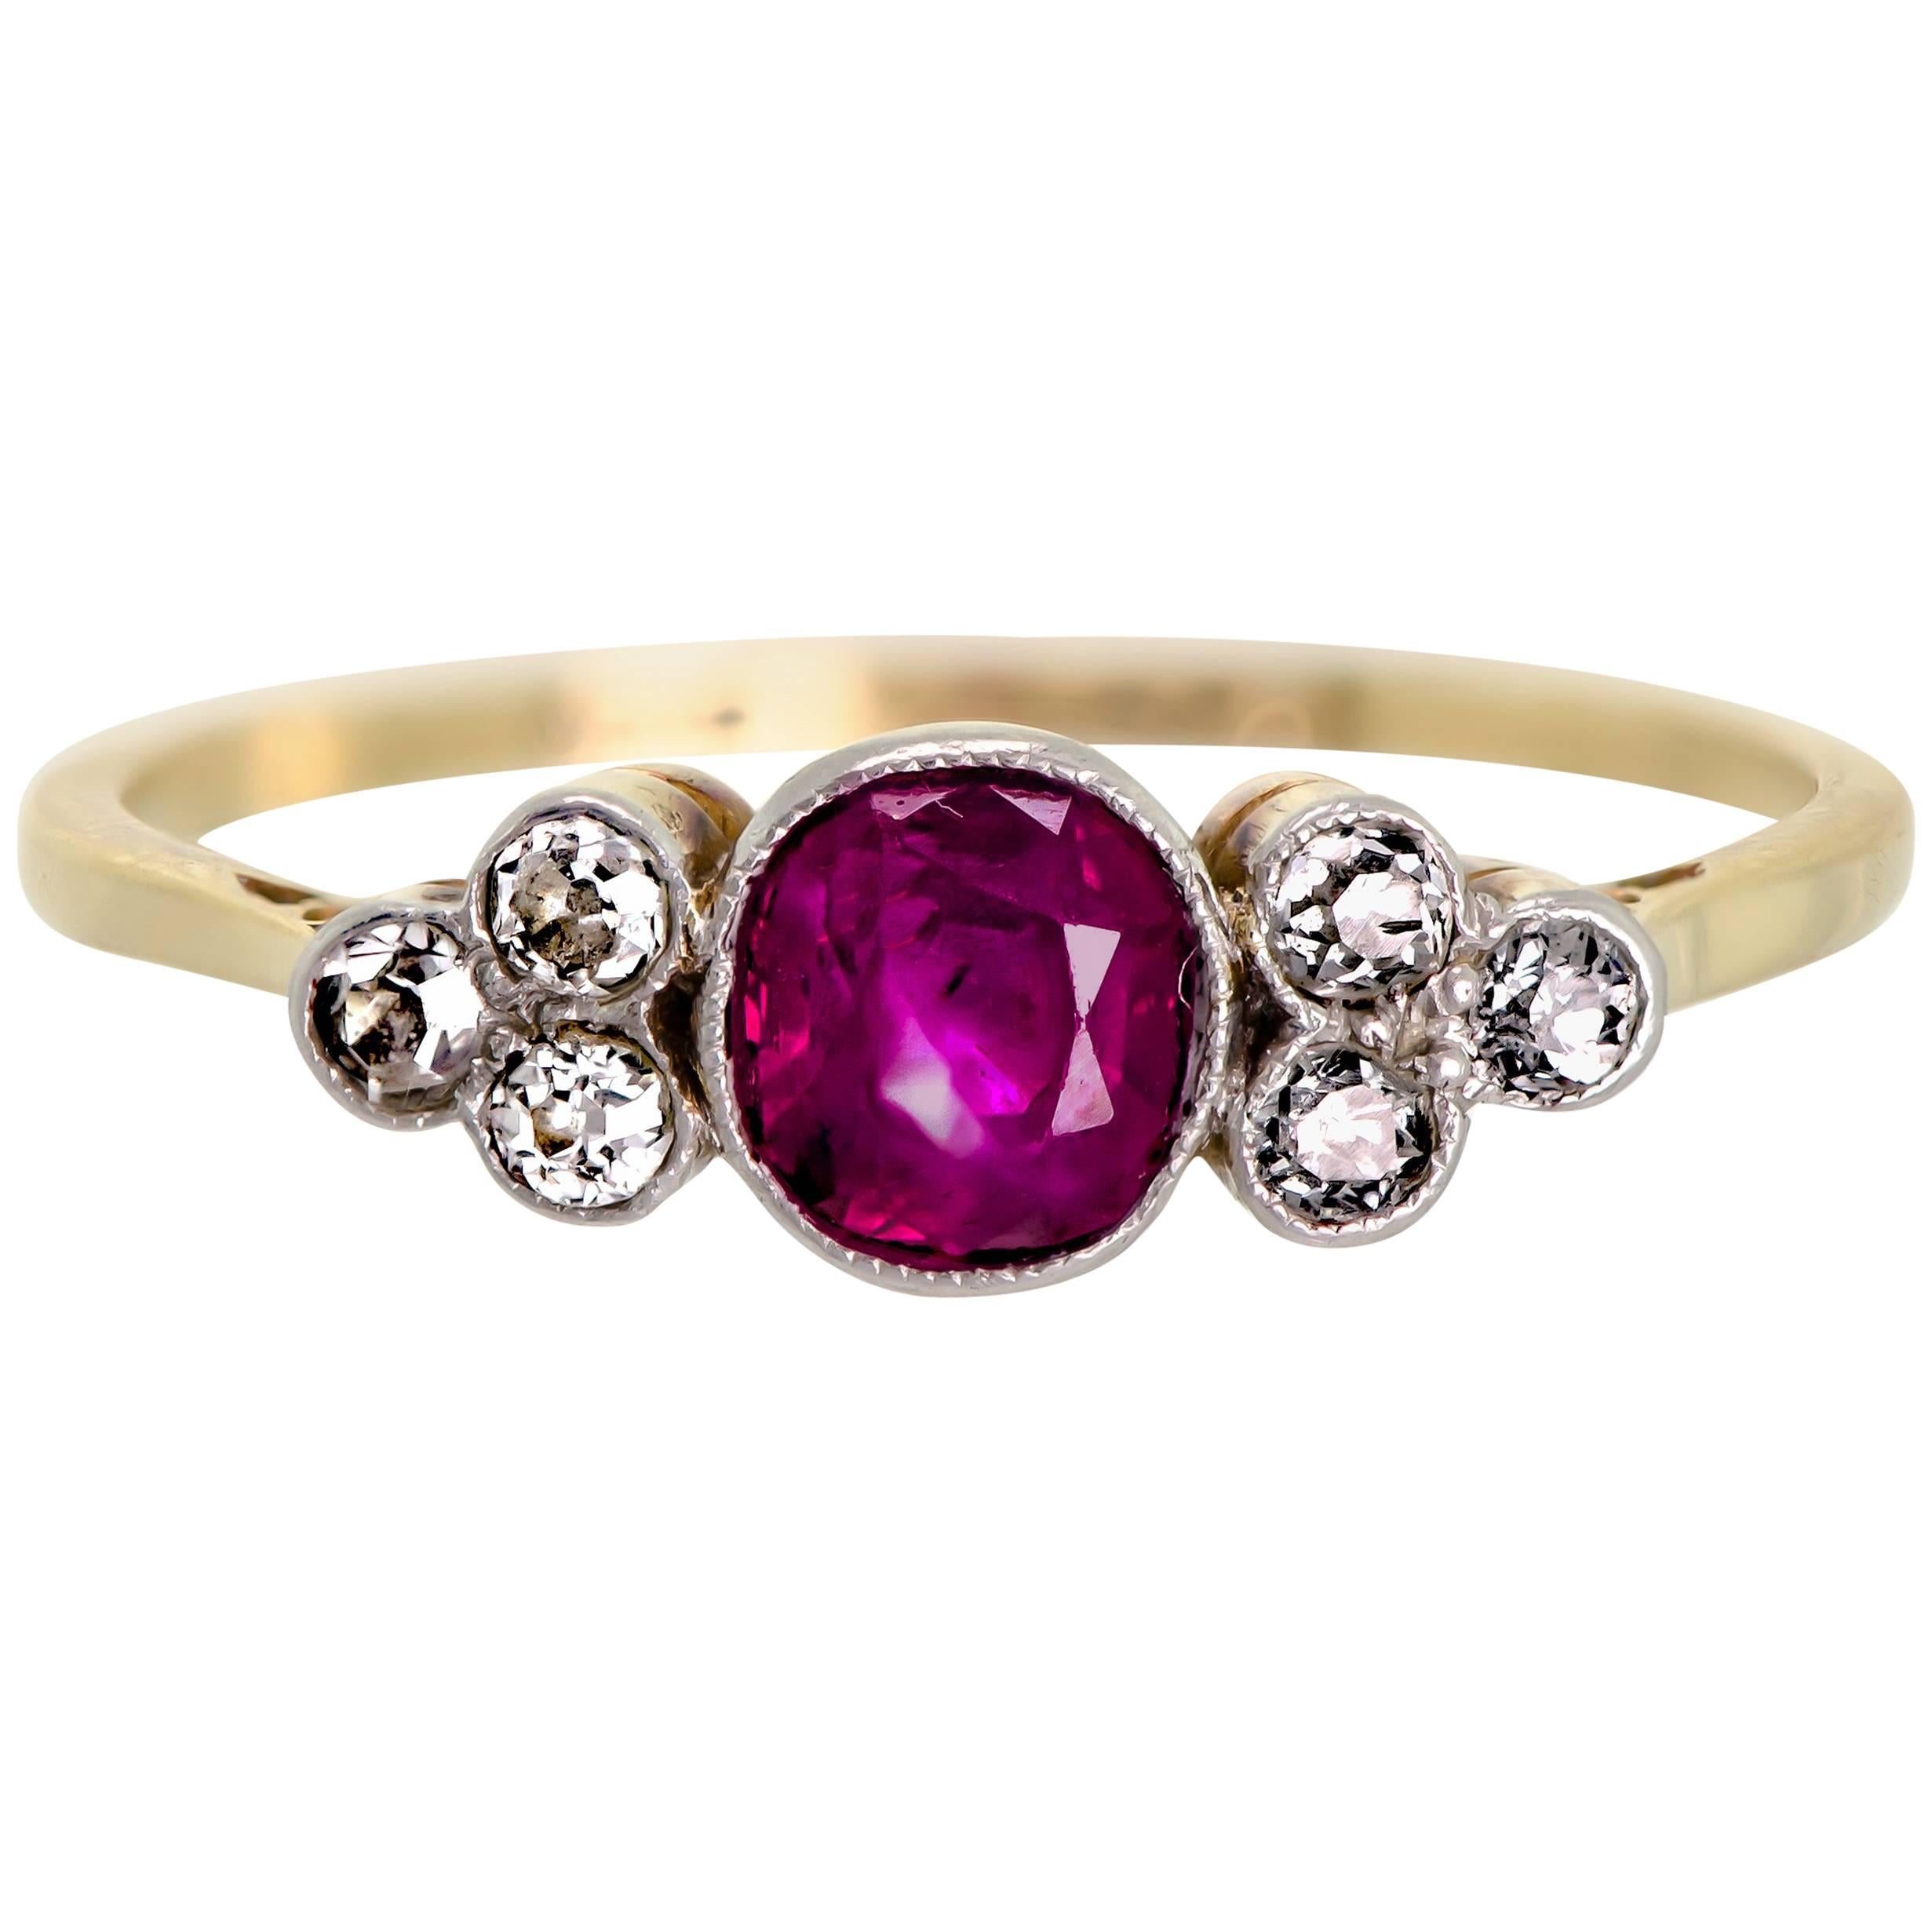 Very Sweet Petite Antique Turn of the Century Ruby and Diamond Ring